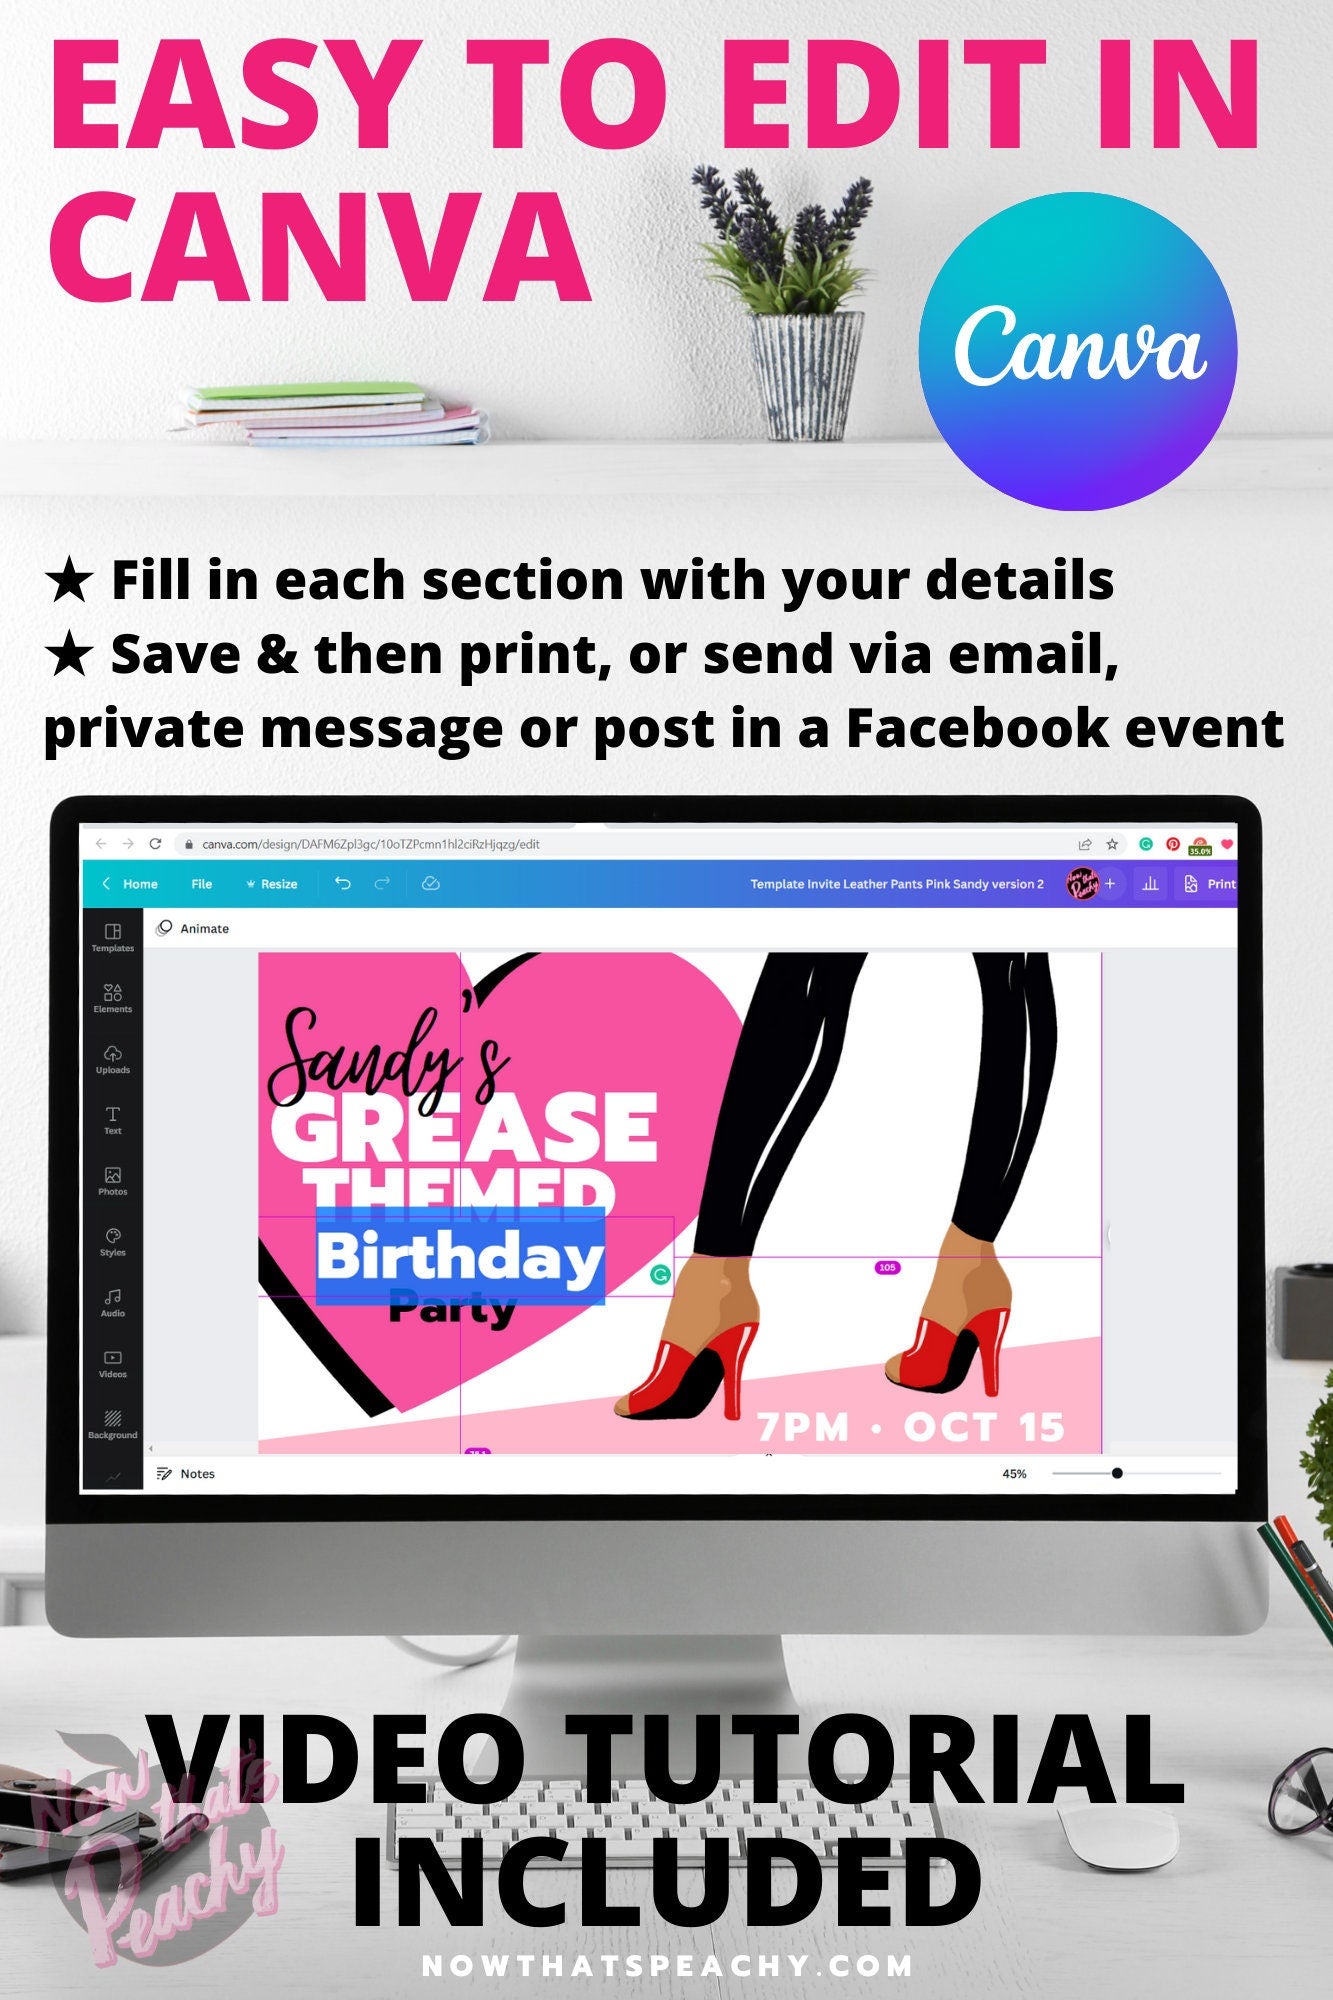 Grease Movie Editable party invite easy to edit in canva custom 1950s fifties 50's printable template digital instant download edit Danny Sandy T-birds Pink Ladies  invite soda hop jukebox rockabilly rock'n'roll musical movie design pink black white modern color fun themed bachelorette hens bride-to-be bridal shower event 